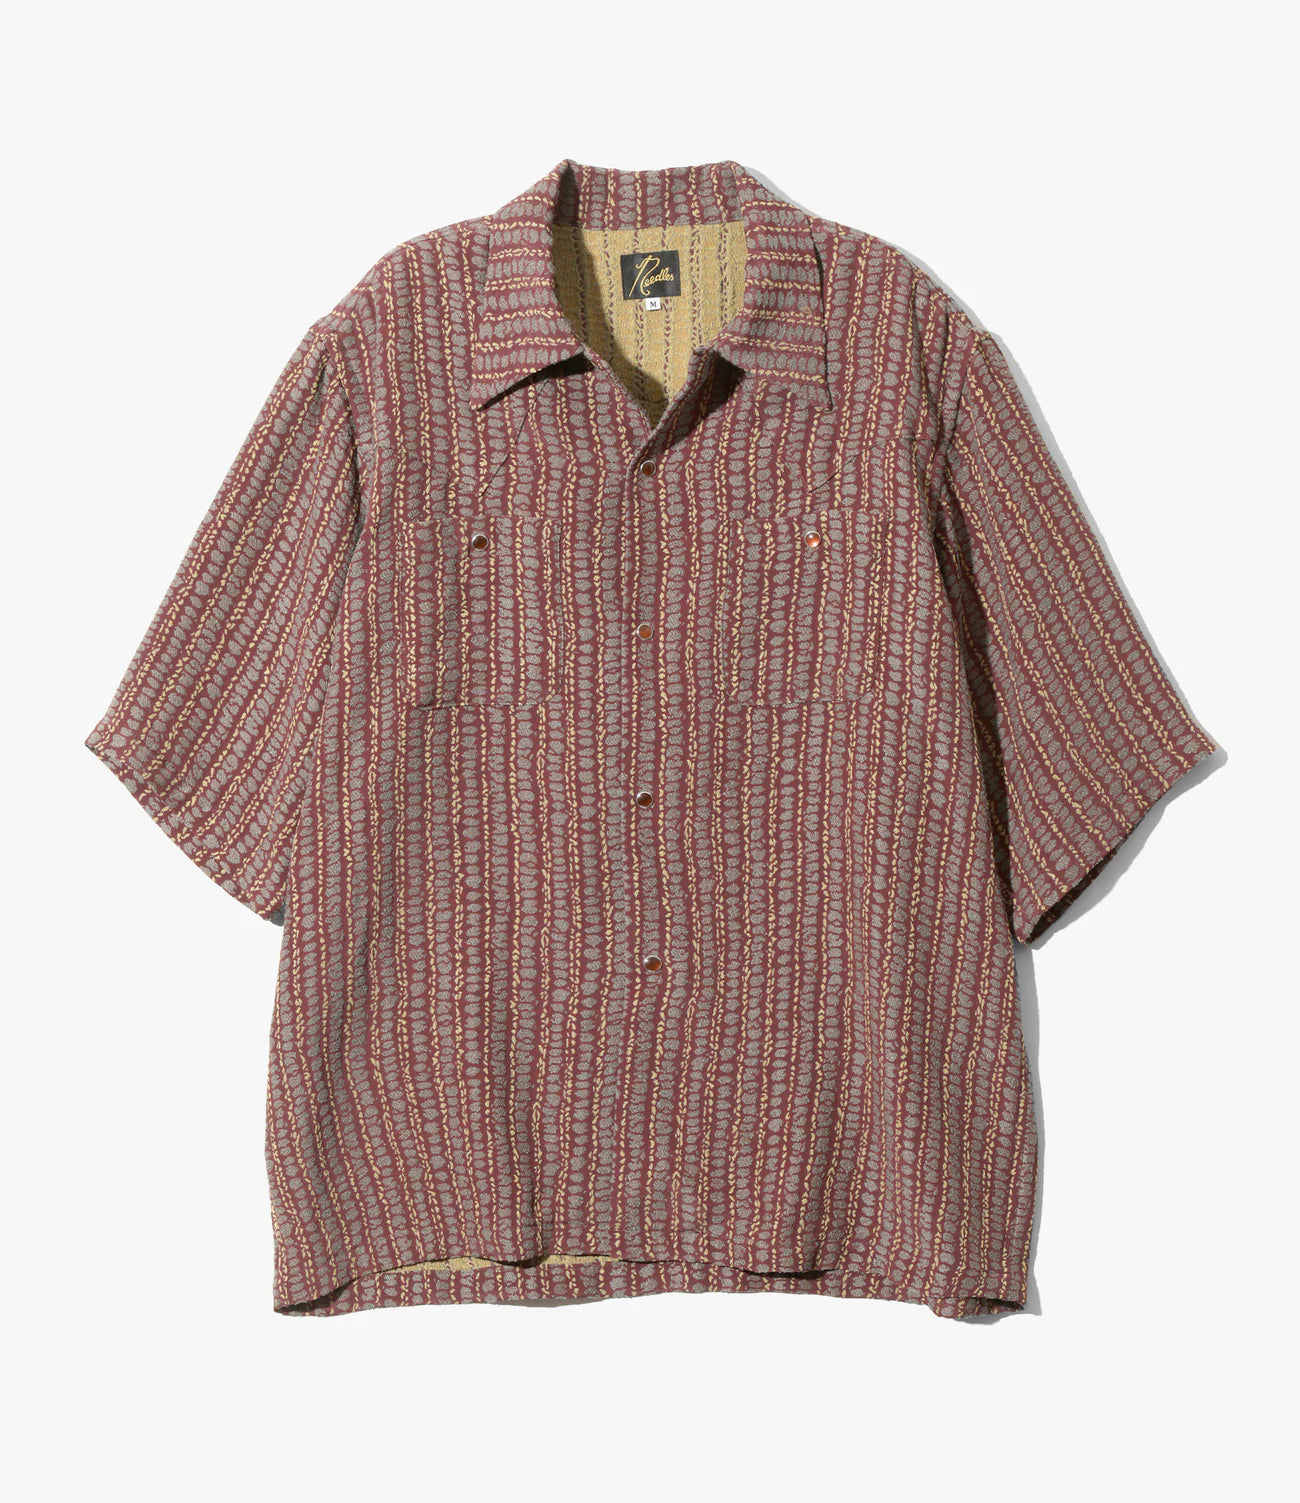 Needles S/S Cowboy One-Up Shirt - Abstract Stripe Jq - Bordeaux